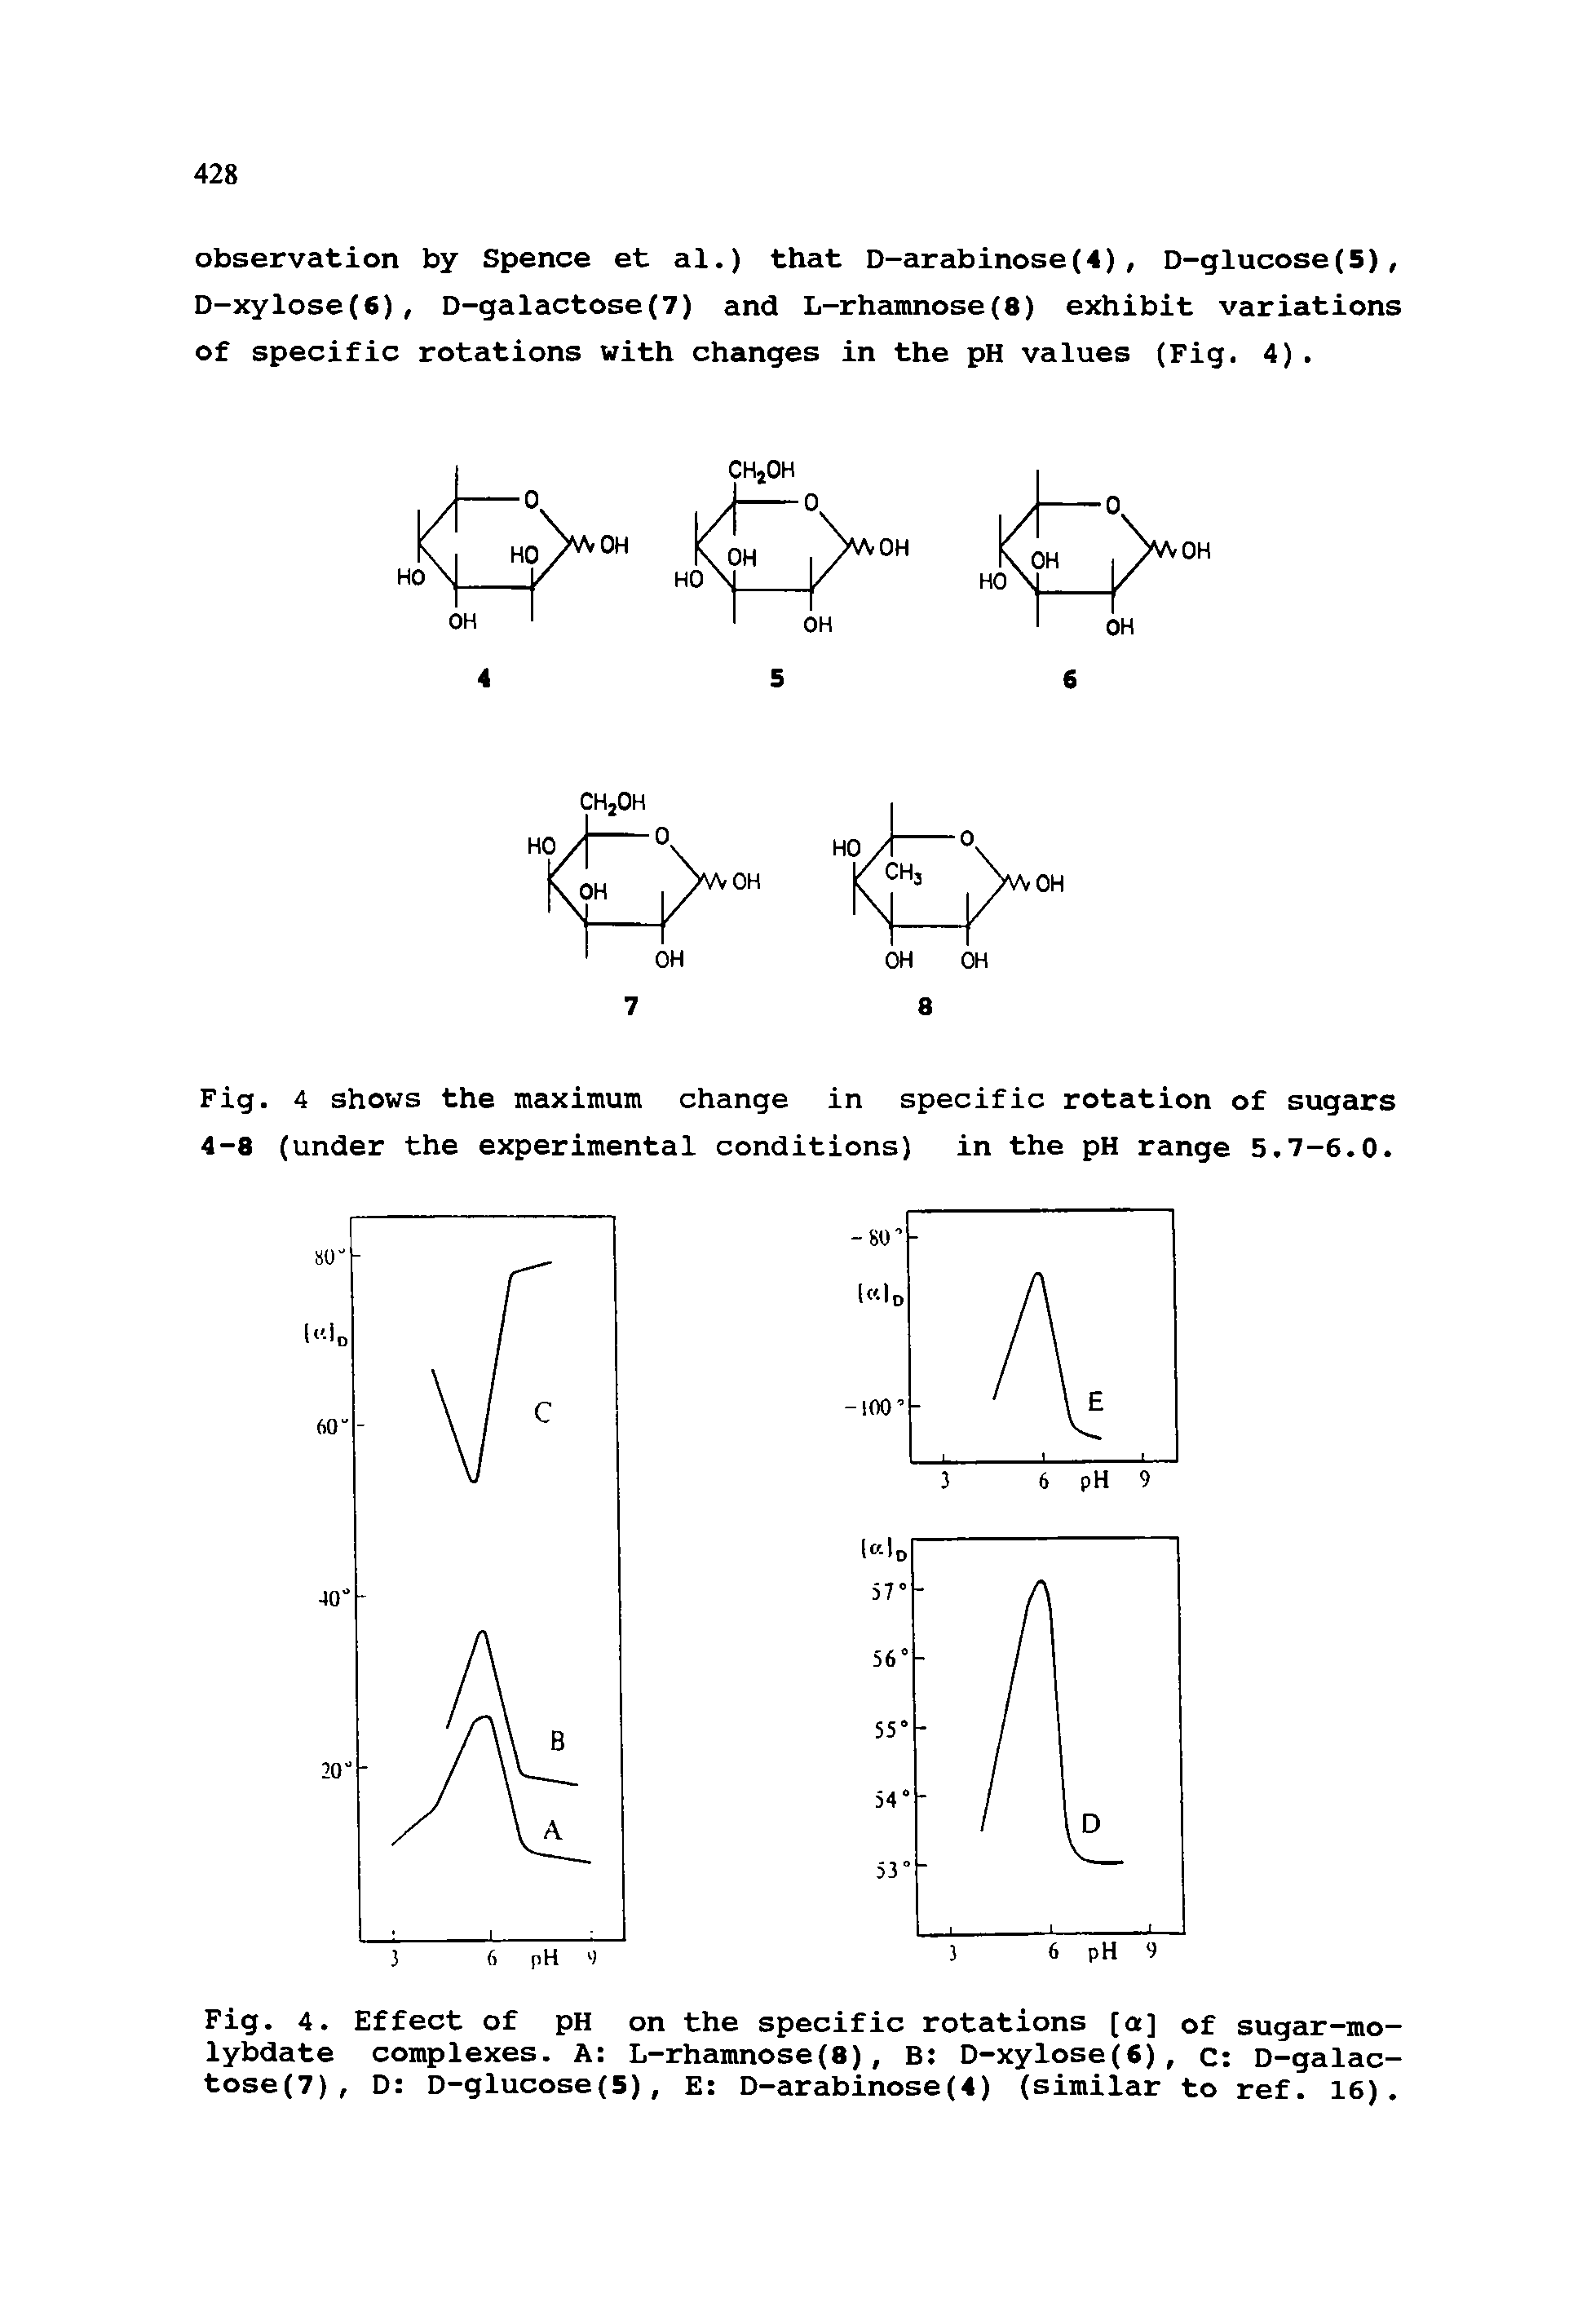 Fig. 4. Effect of pH on the specific rotations [a] of sugar-molybdate complexes. A L-rhamnose(8), B D-xylose(6), C D-galac-tose(7), D D-glucose(5), E D-arabinose(4) (similar to ref. 16).